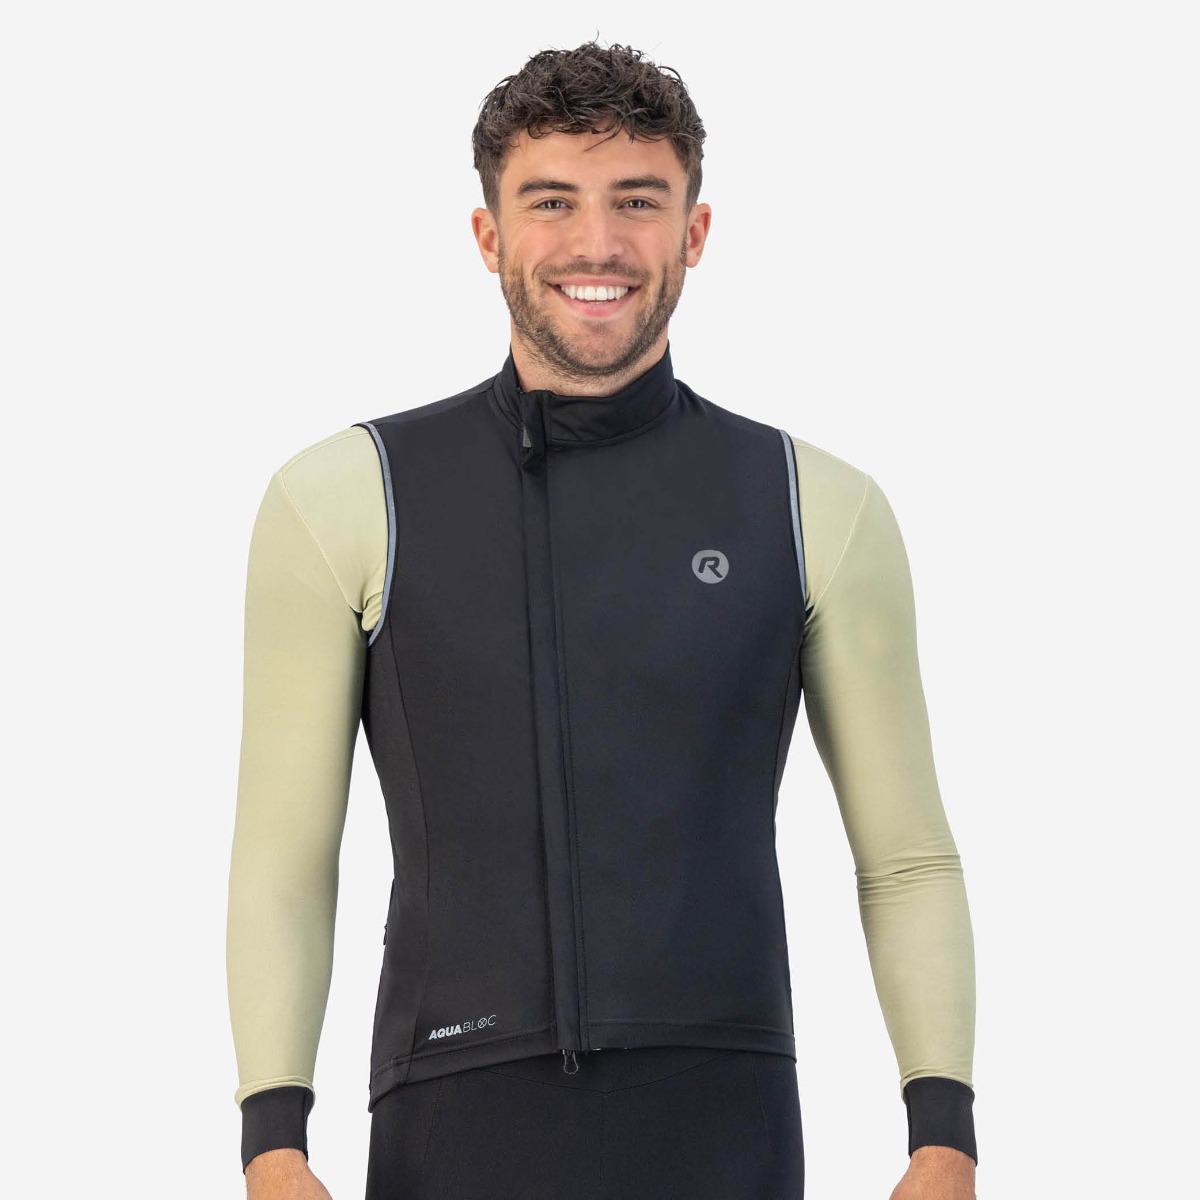 Cyclist wearing the Rogelli Essential Body Vest over a long-sleeve cycling shirt for optimal protection against wind and cold